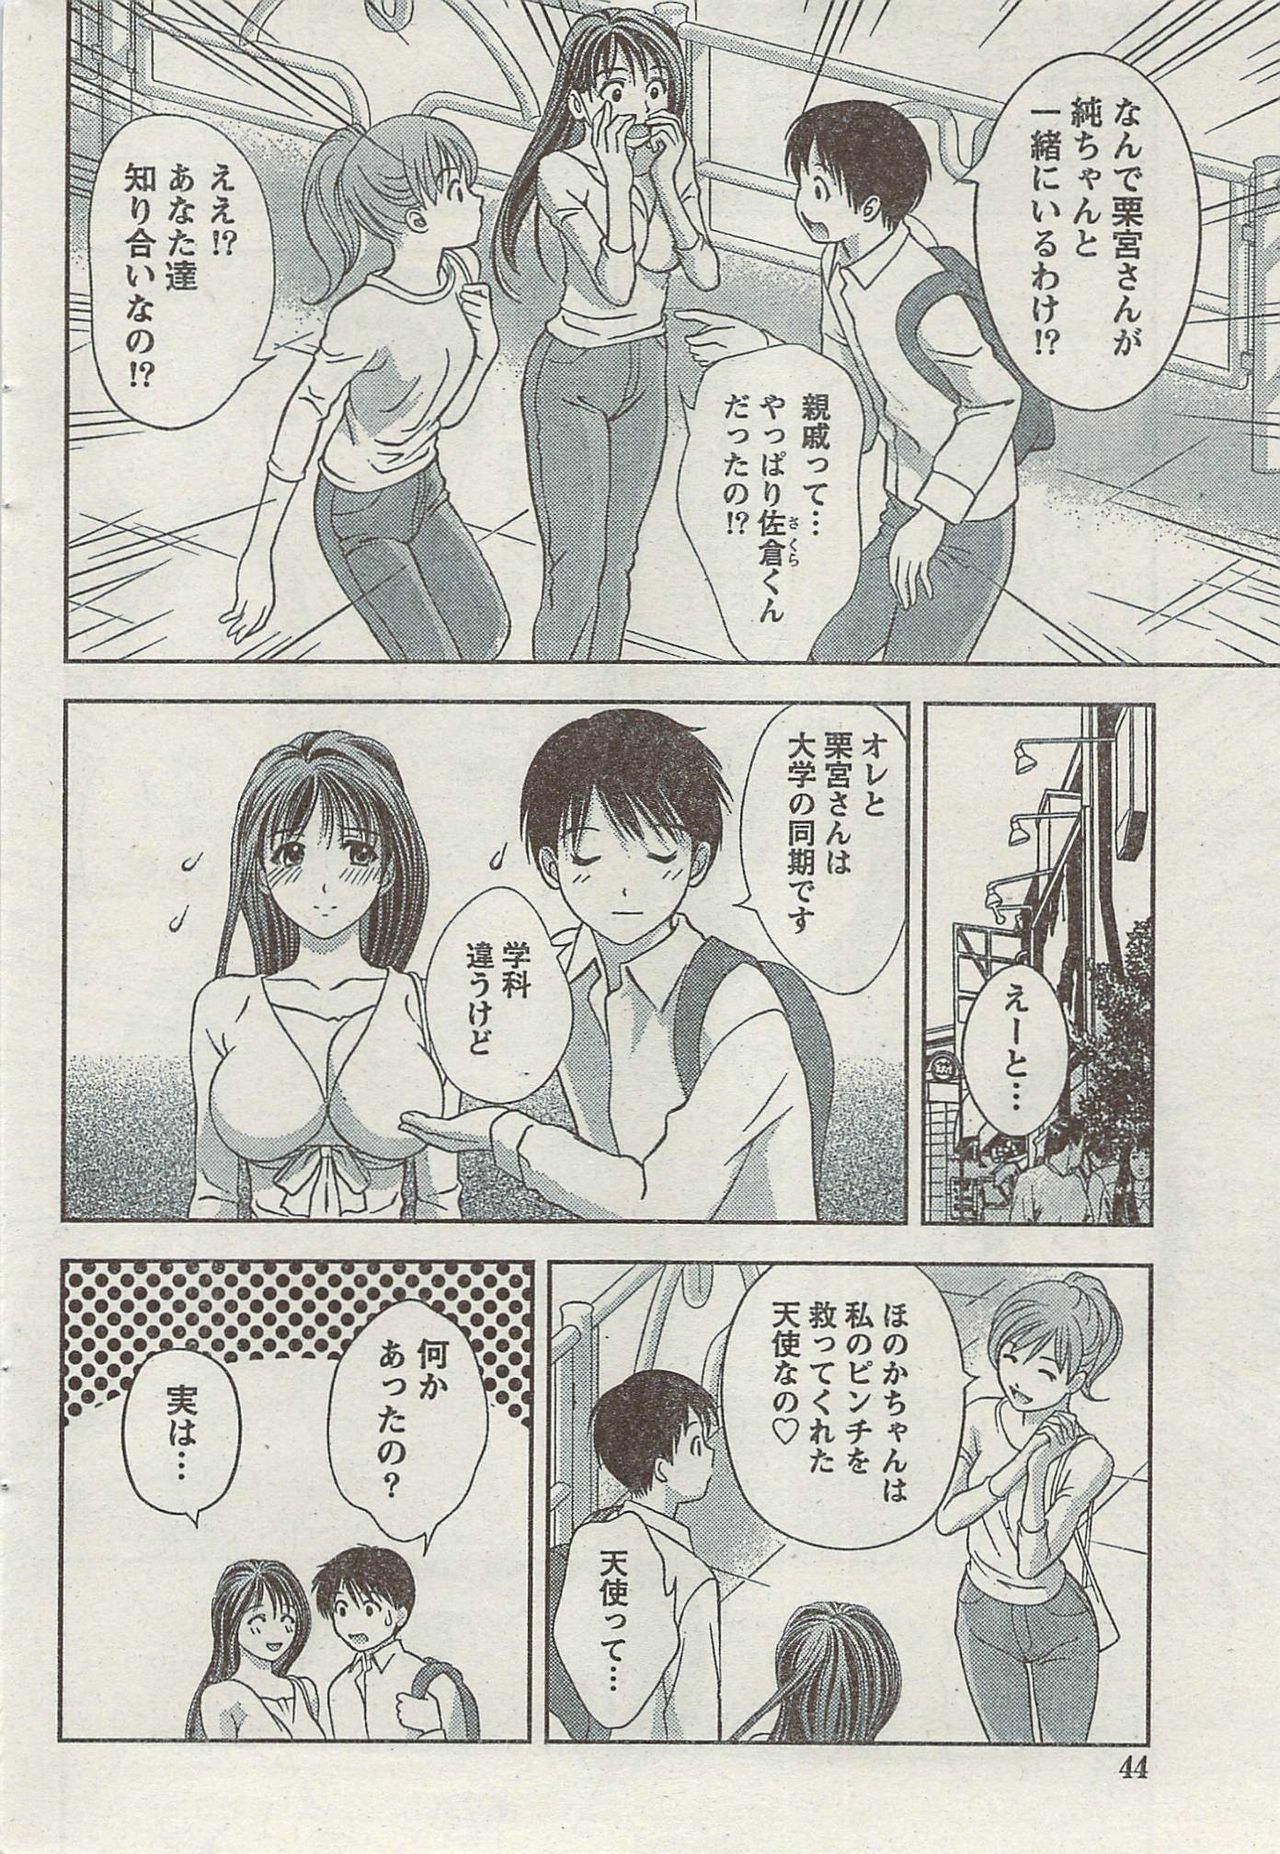 Monthly Vitaman 2007-08 page 44 full